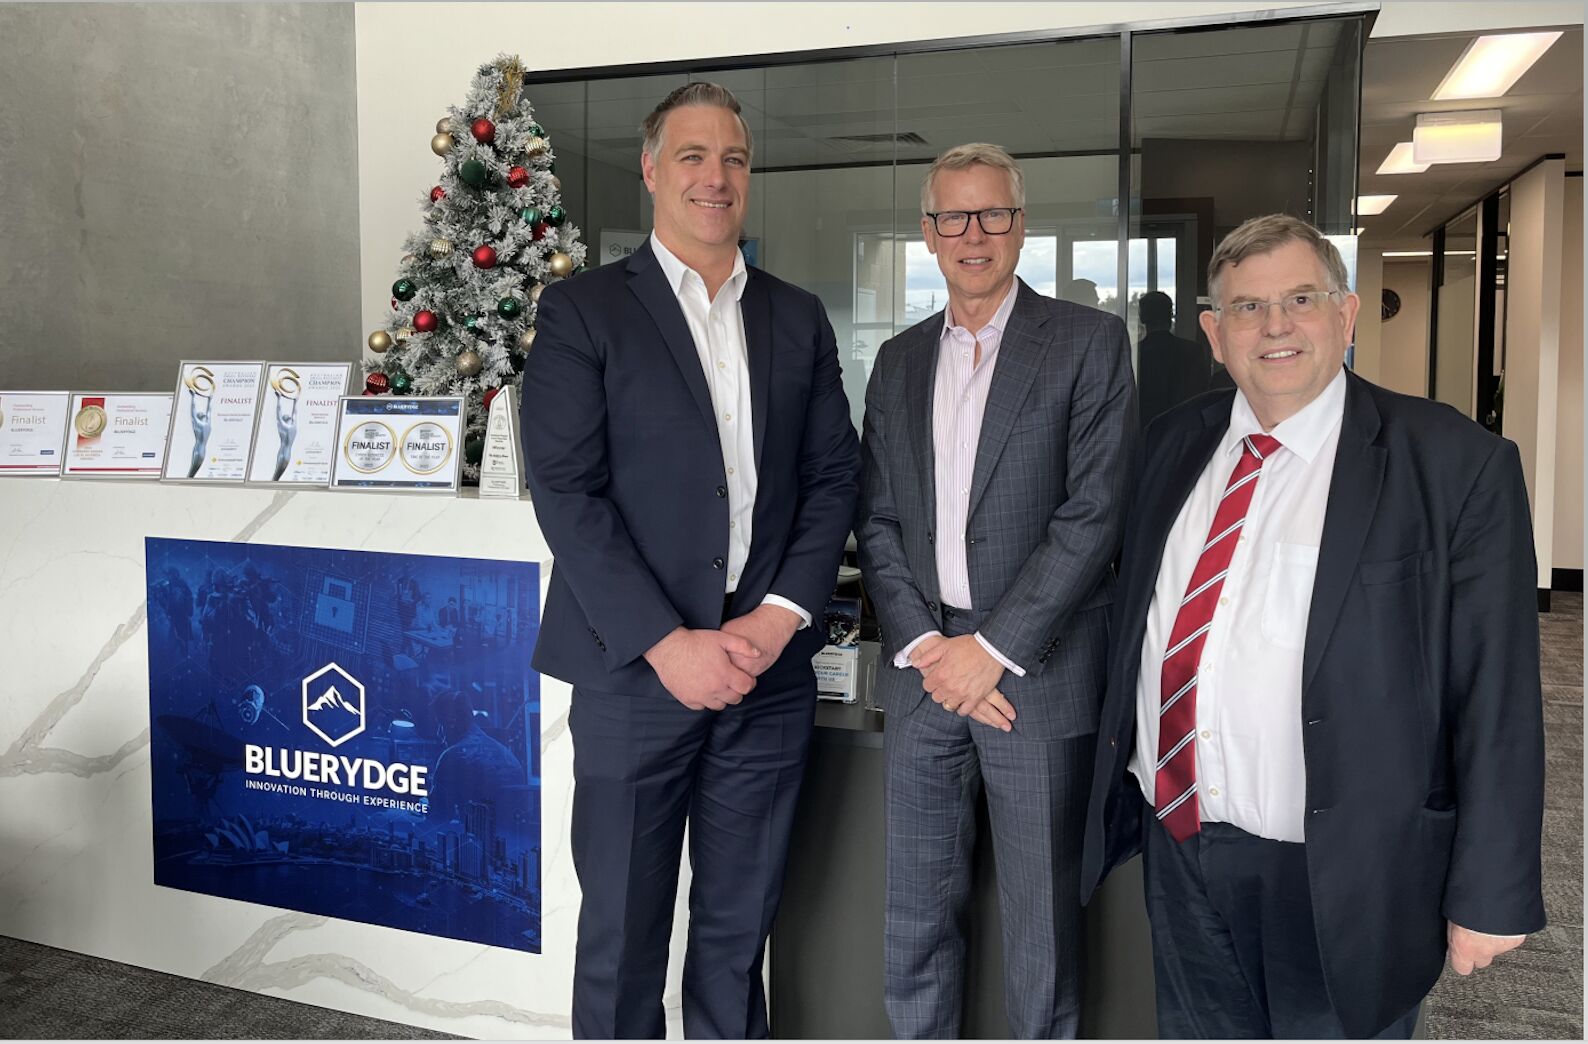 Bluerydge continues partnership with Australian Computer Society (ACS)